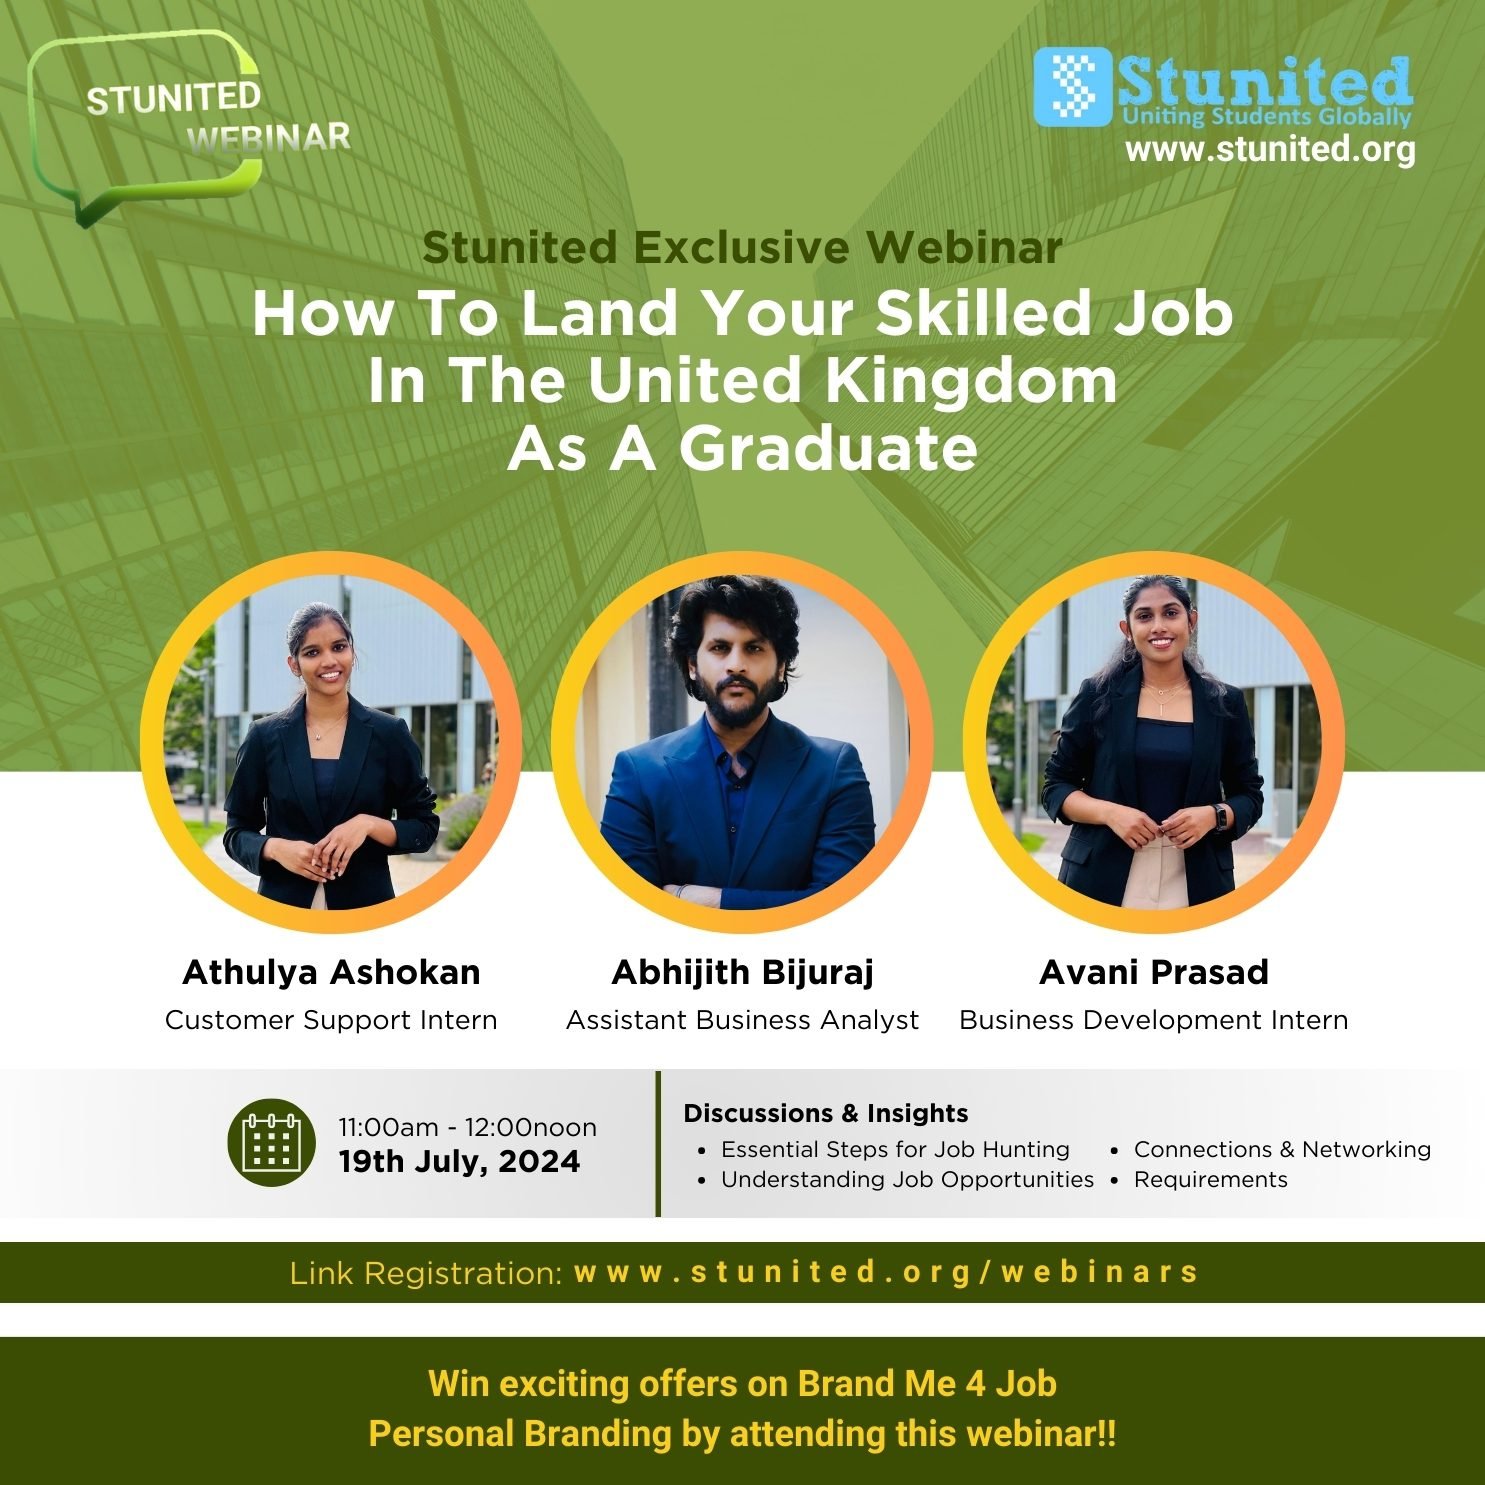 How to land your skilled job in the UK as a graduate